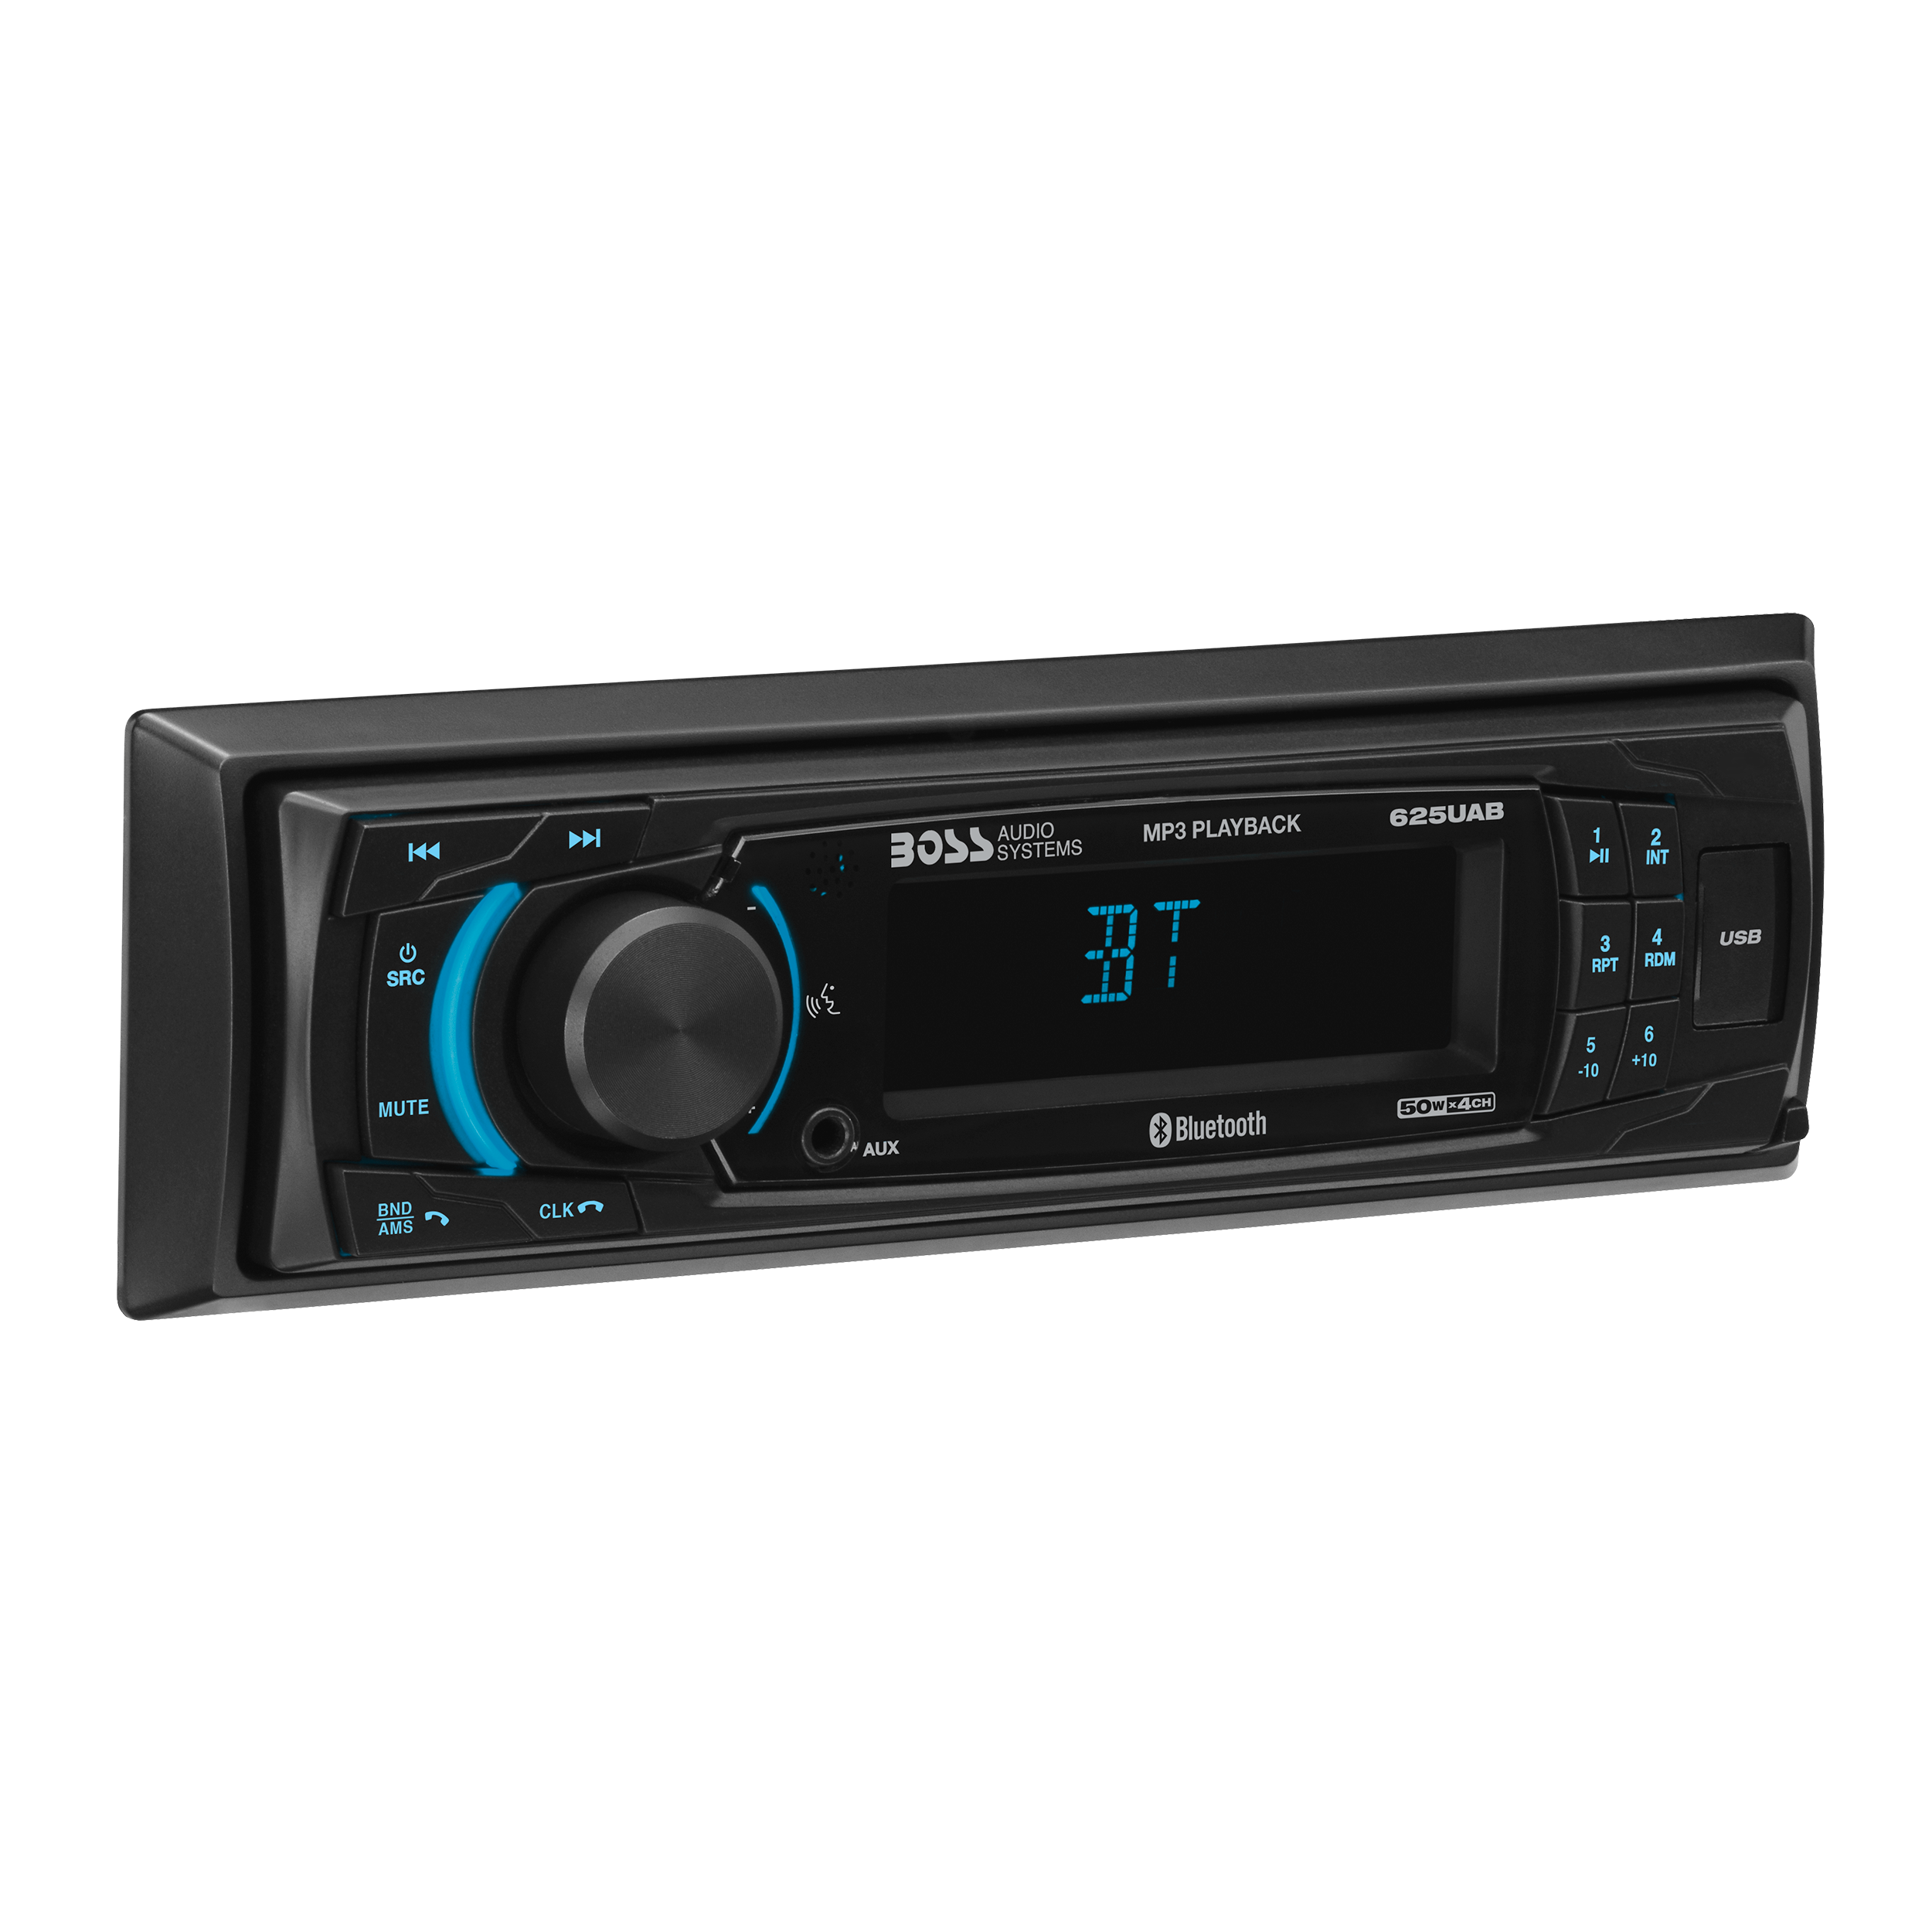  BOSS Audio Systems 616UAB Car Stereo - Single Din, Bluetooth,  No CD DVD Player, AM/FM Radio Receiver, Wireless Remote Control, MP3, USB,  Aux-in, : Electronics